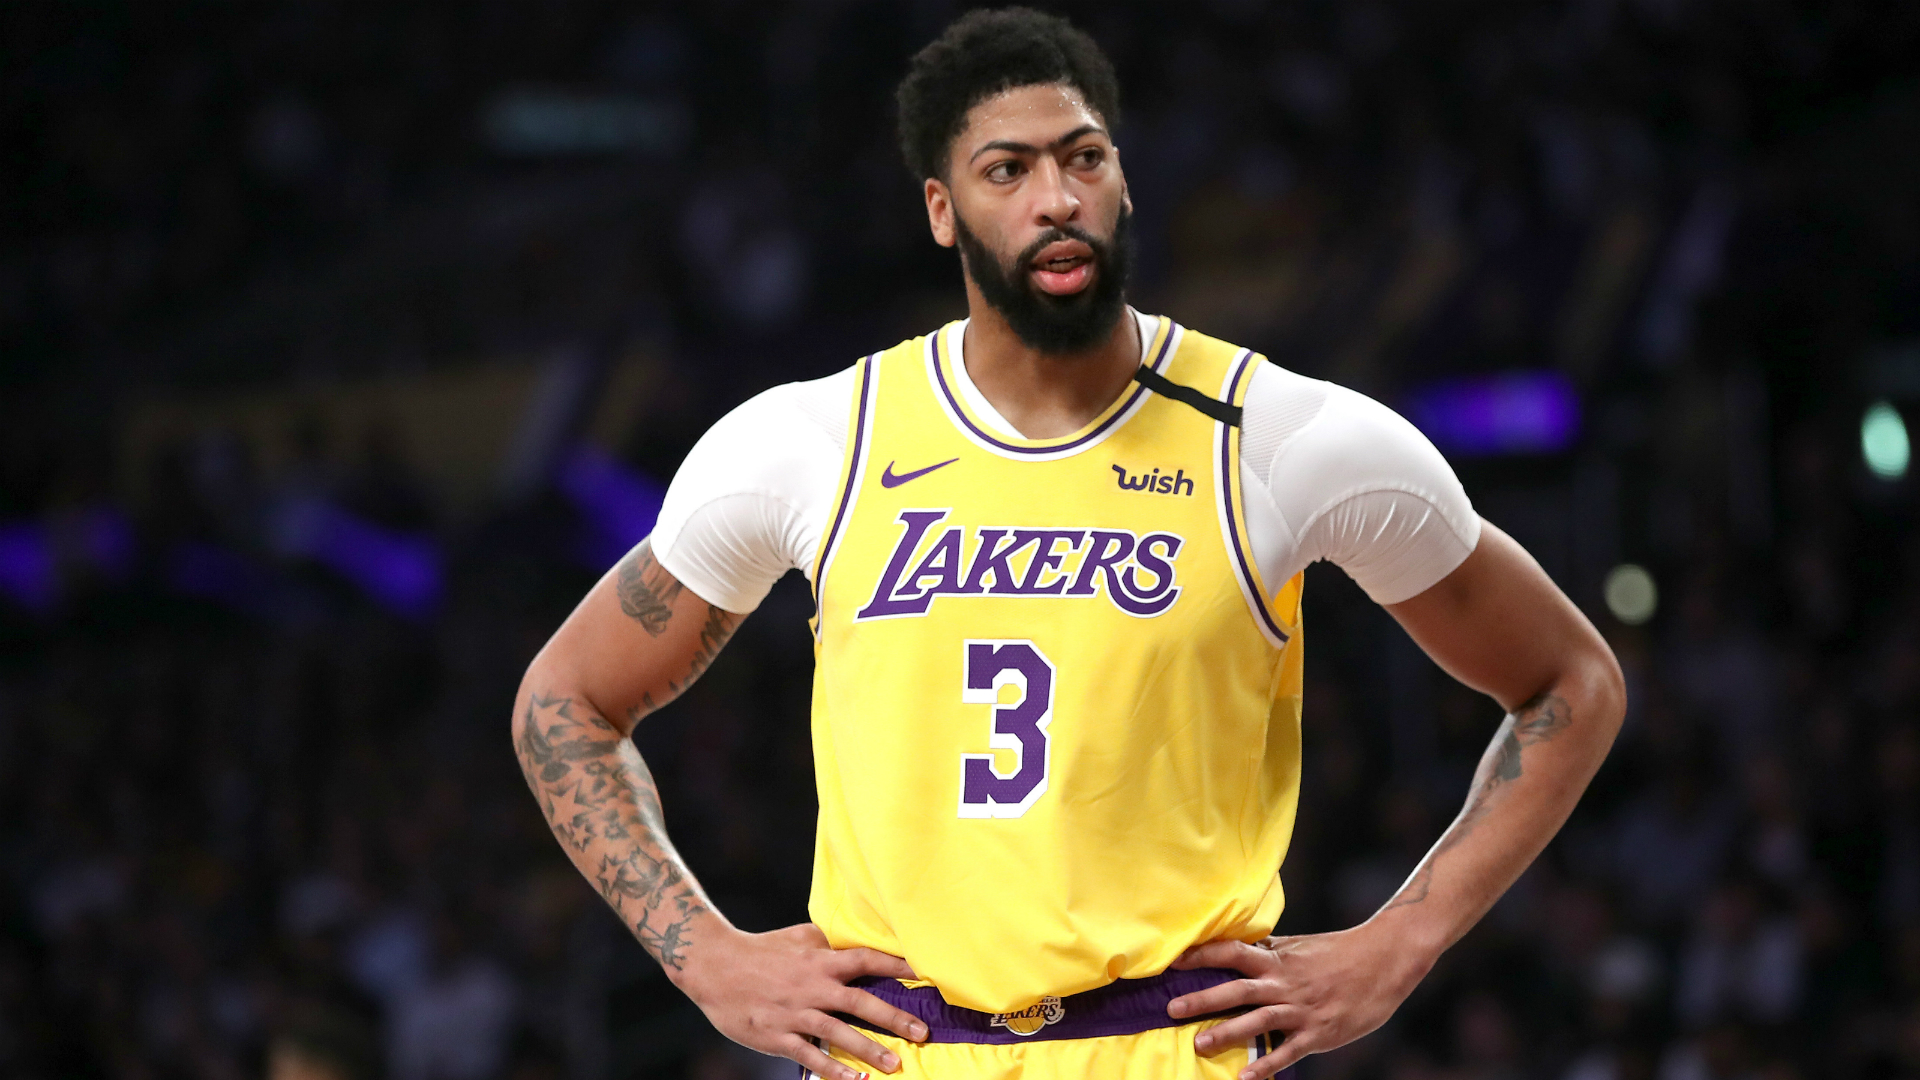 Anthony Davis provided an update on his fitness as he recovers from a back injury, which has forced him to miss three straight games.